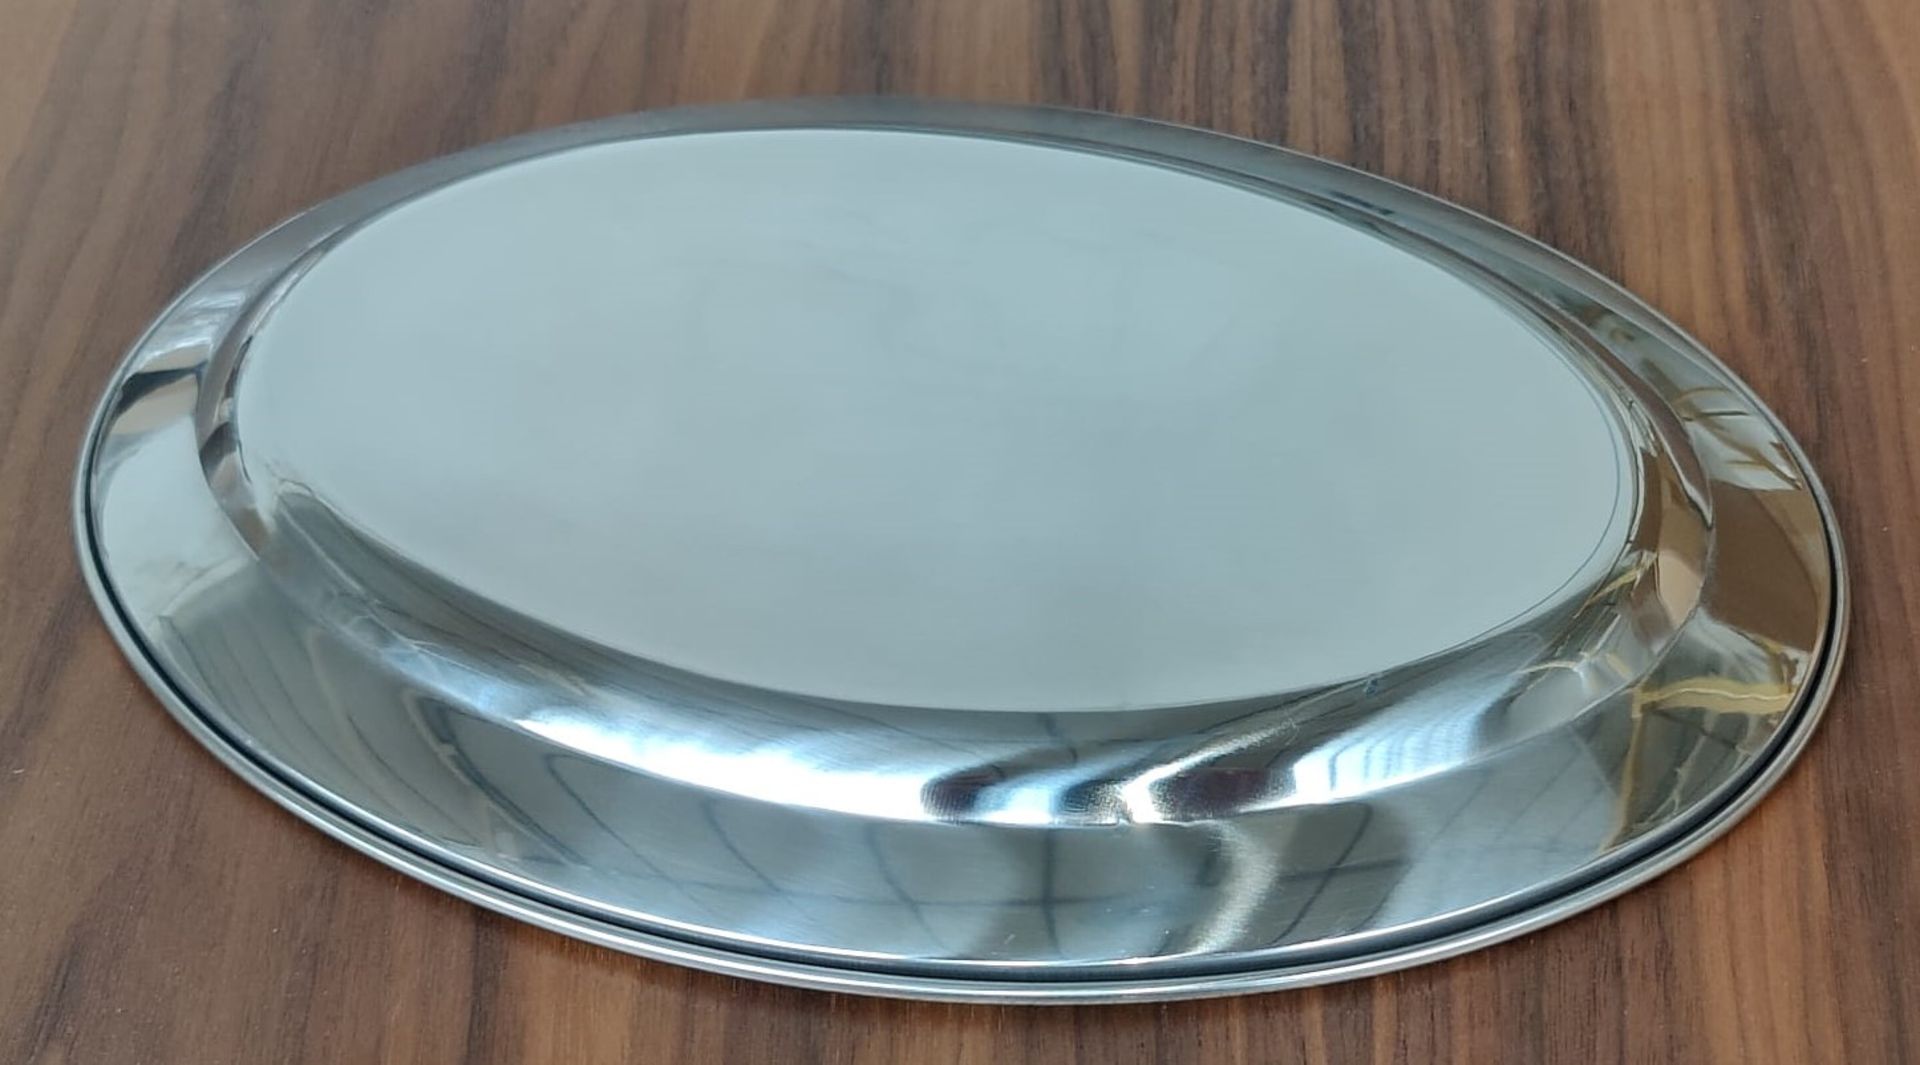 18 x Stainless Steel Small Oval Service Trays - Size: 255mm x 180mm - Brand New Boxed Stock RRP £90 - Image 7 of 7